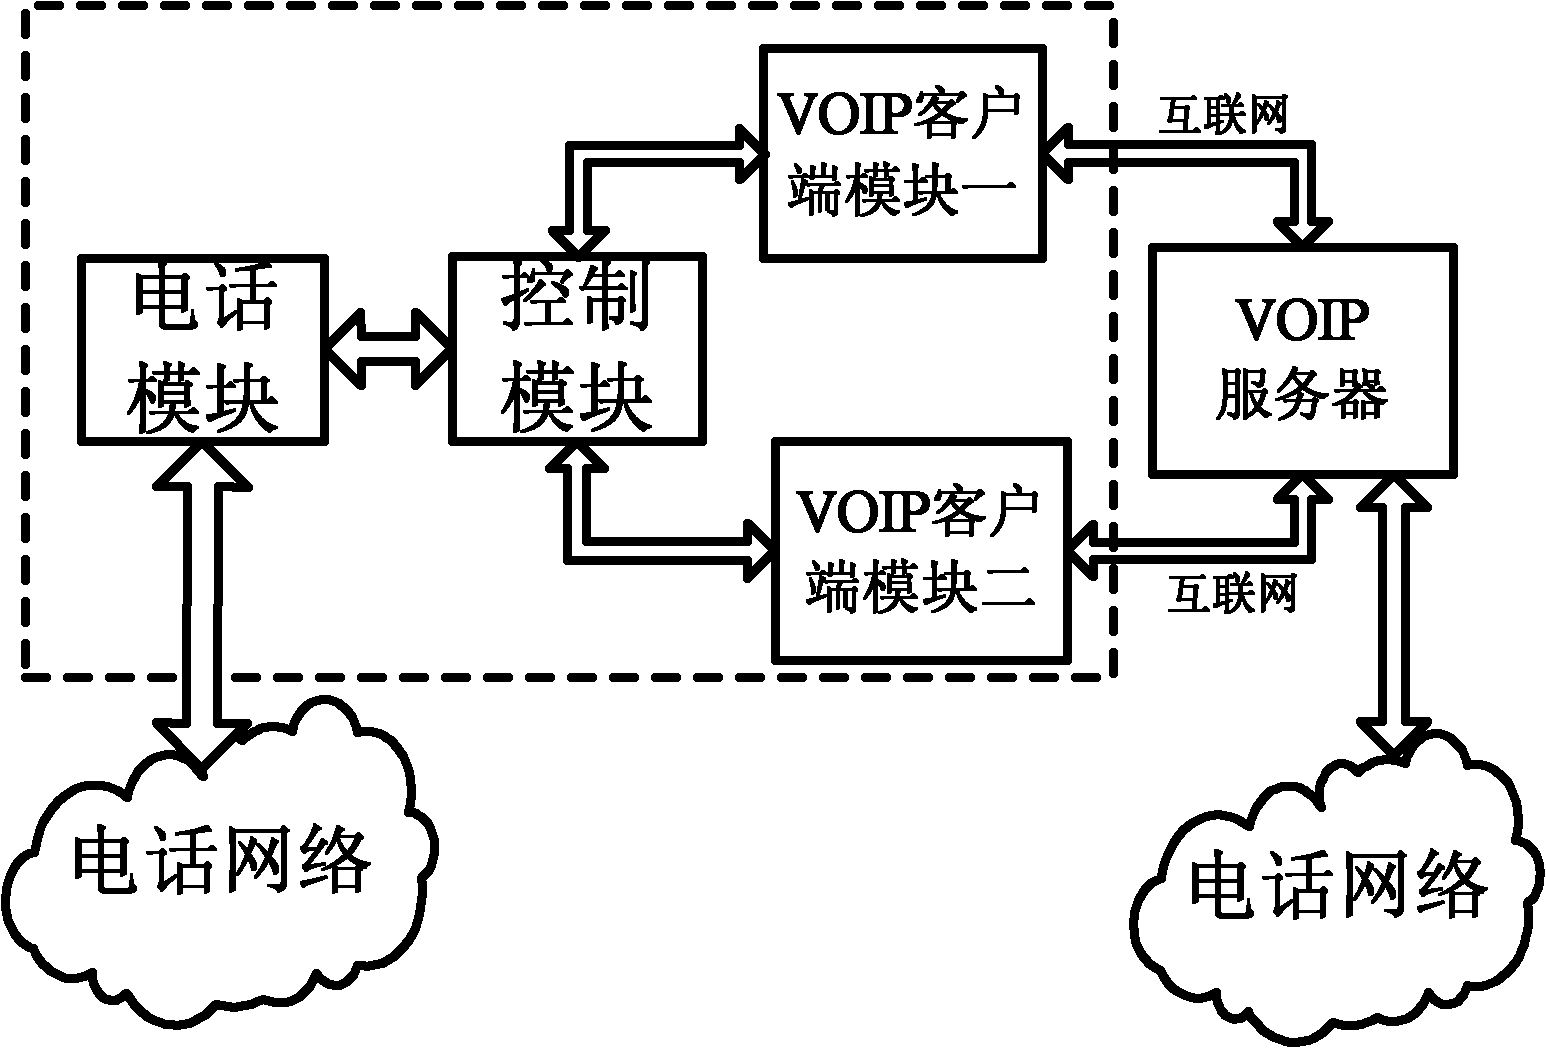 VoIP technology based phone agency device and method for making and answering call by using the same